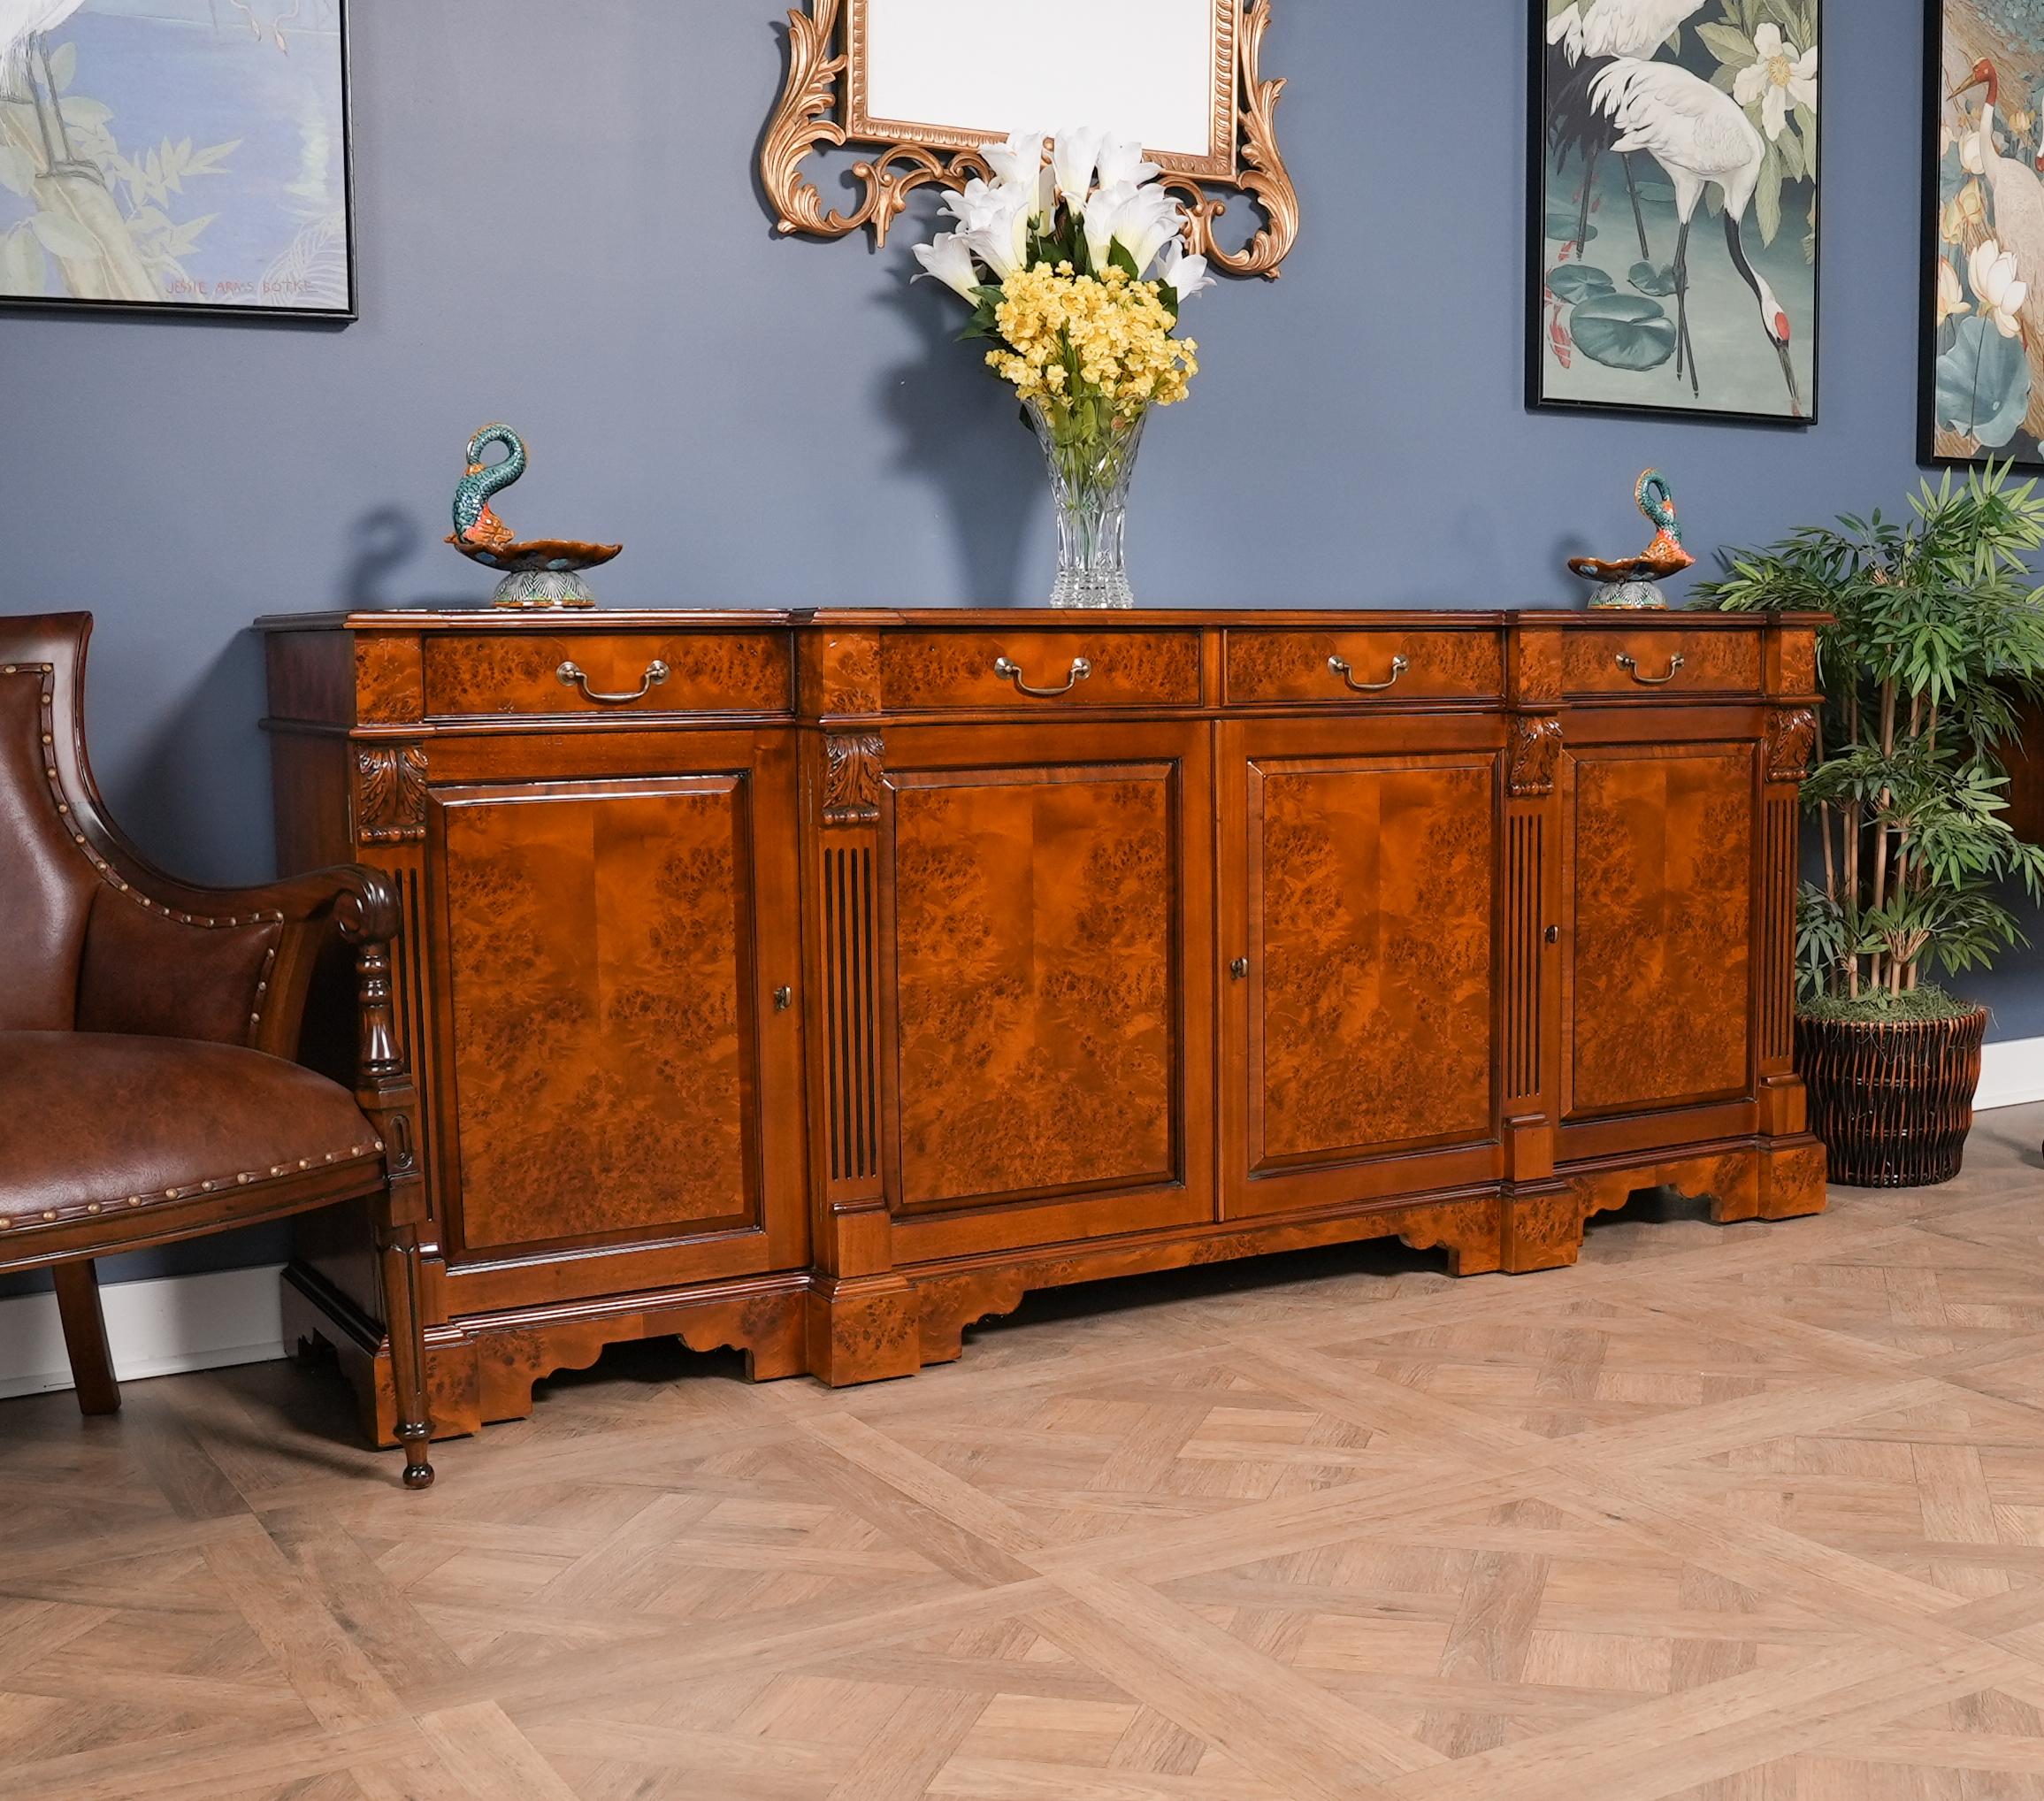 Burled Penhurst Sideboard In New Condition For Sale In Annville, PA